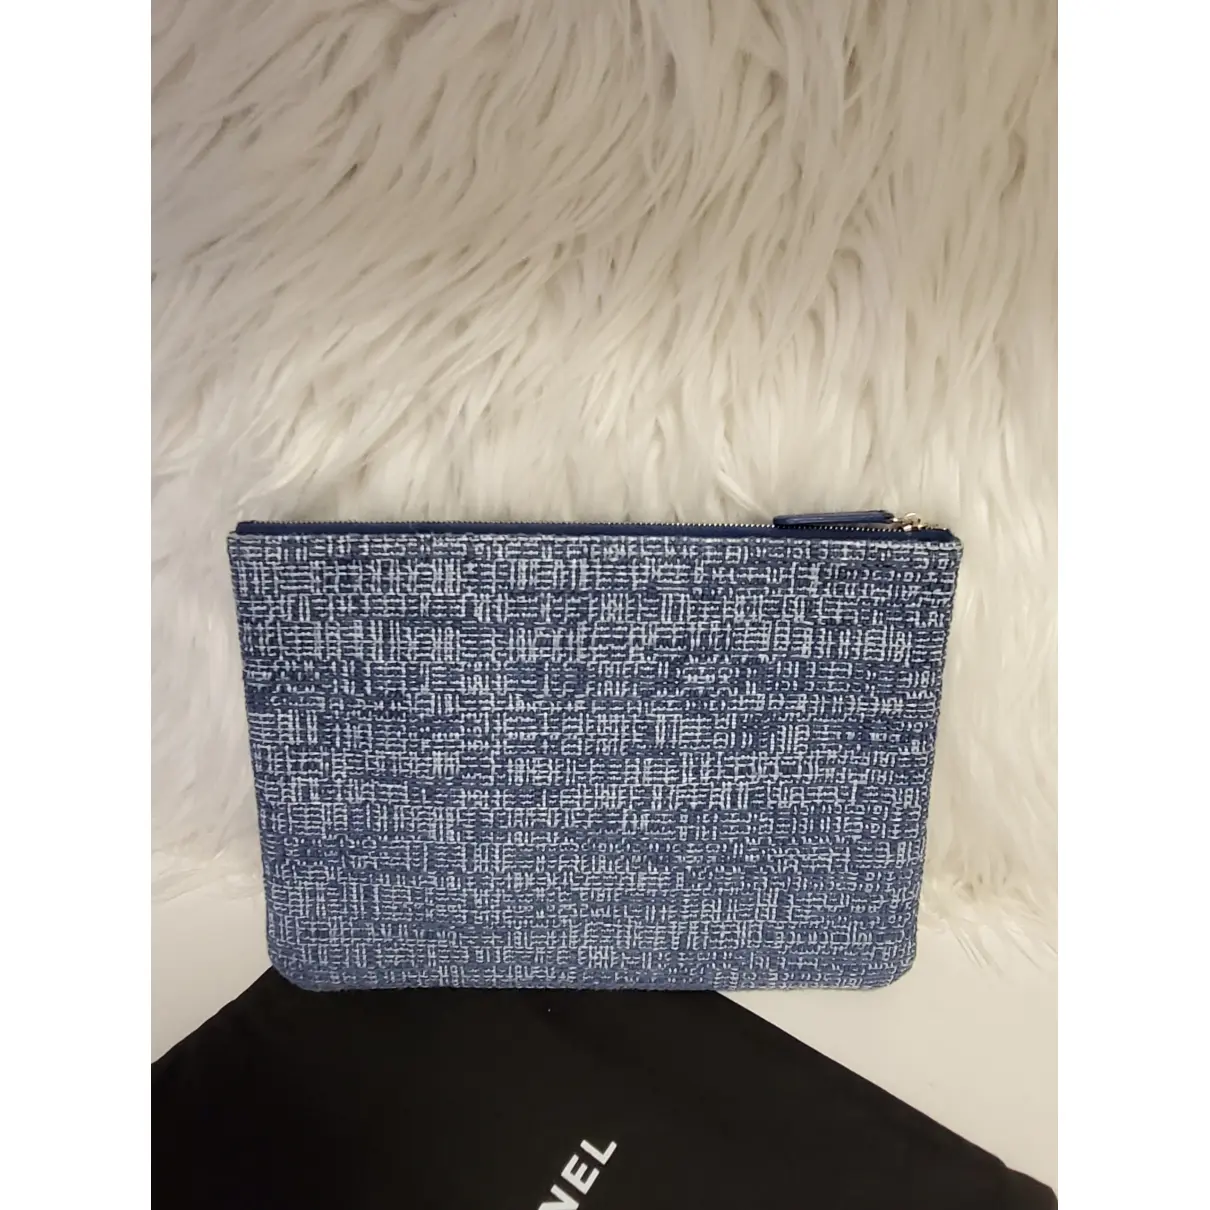 Buy Chanel Deauville cloth clutch bag online